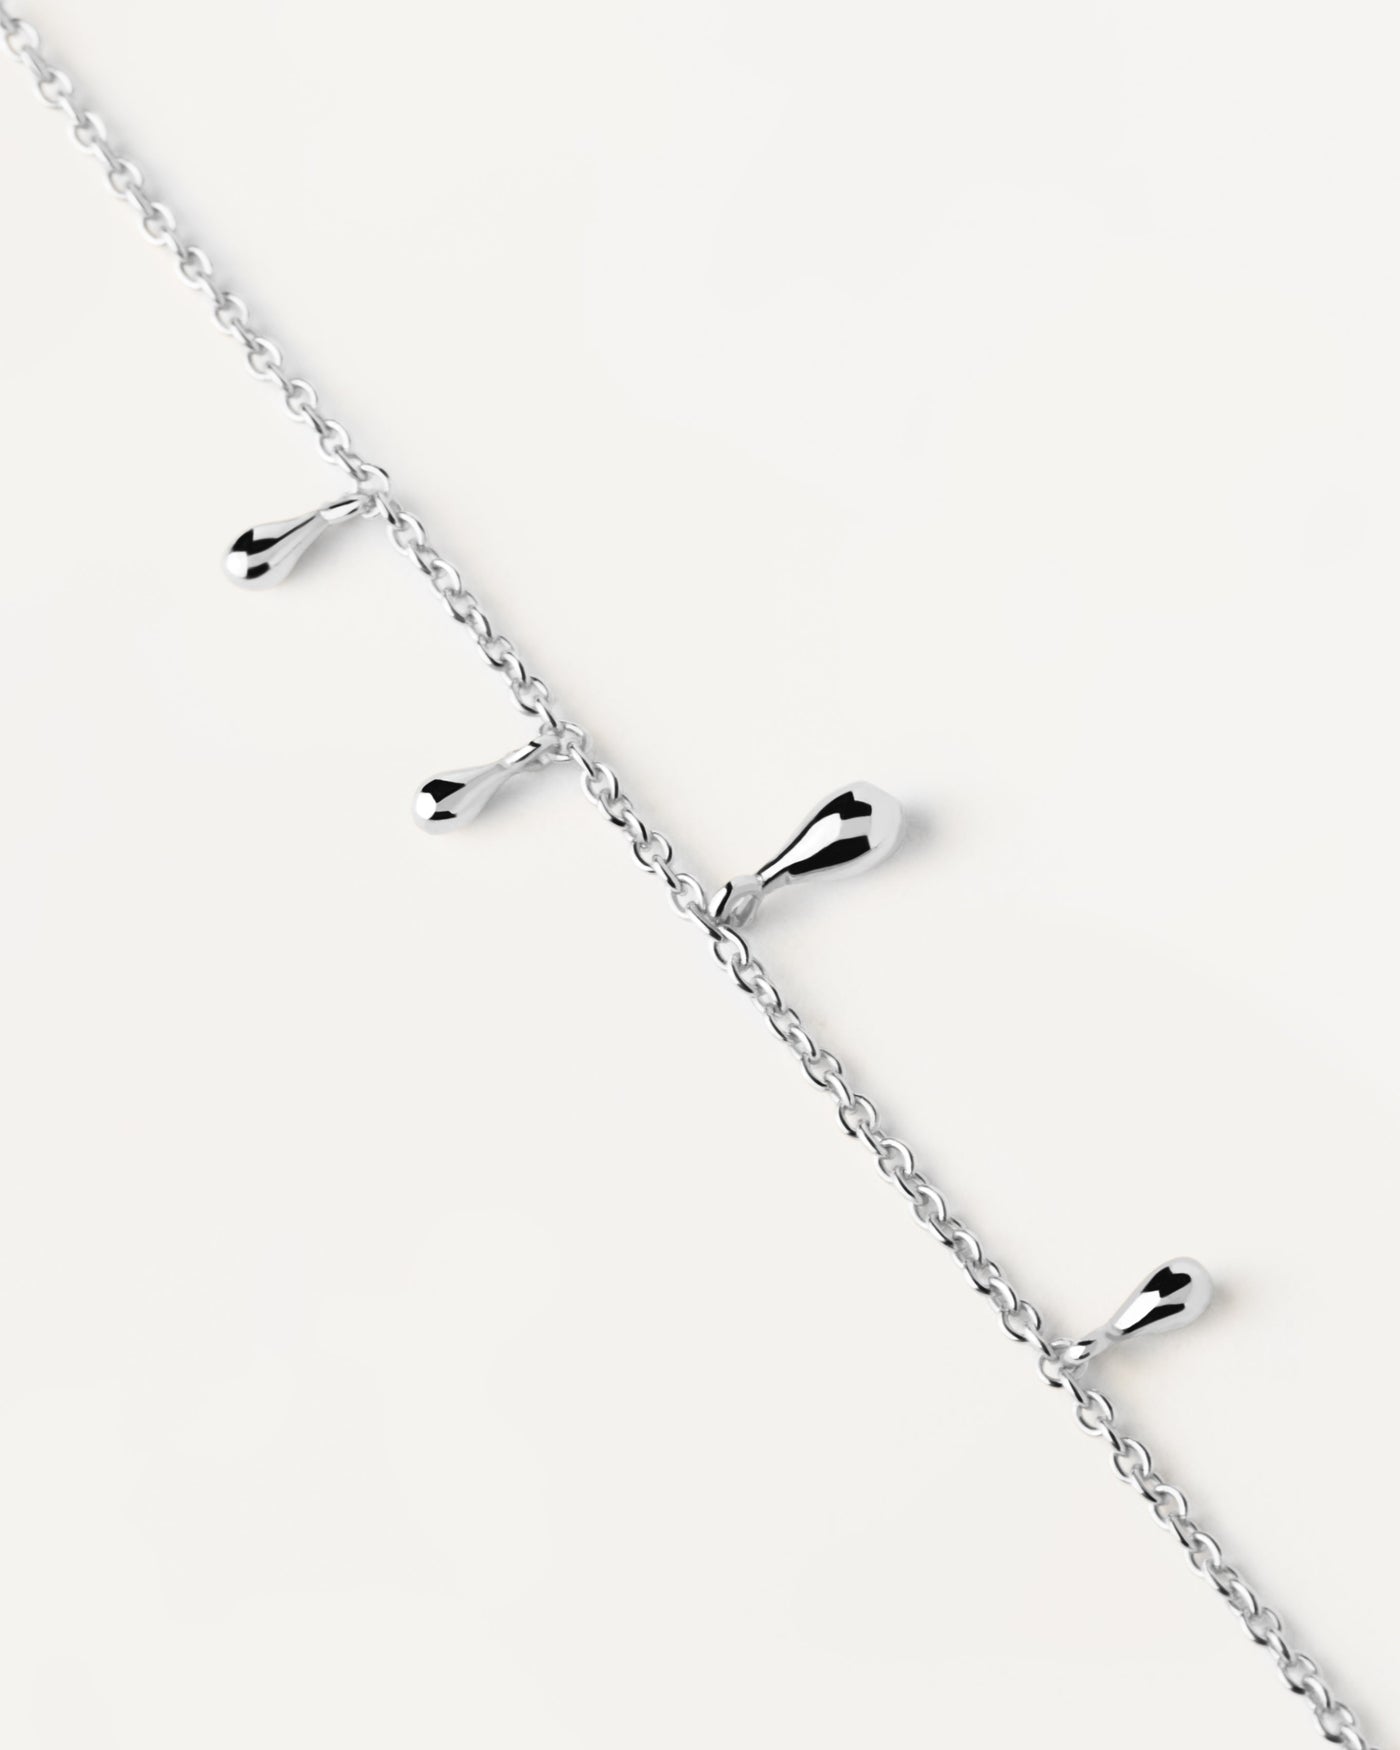 2023 Selection | Teardrop Silver Bracelet. Sterling silver bracelet with small drop pendants. Get the latest arrival from PDPAOLA. Place your order safely and get this Best Seller. Free Shipping.